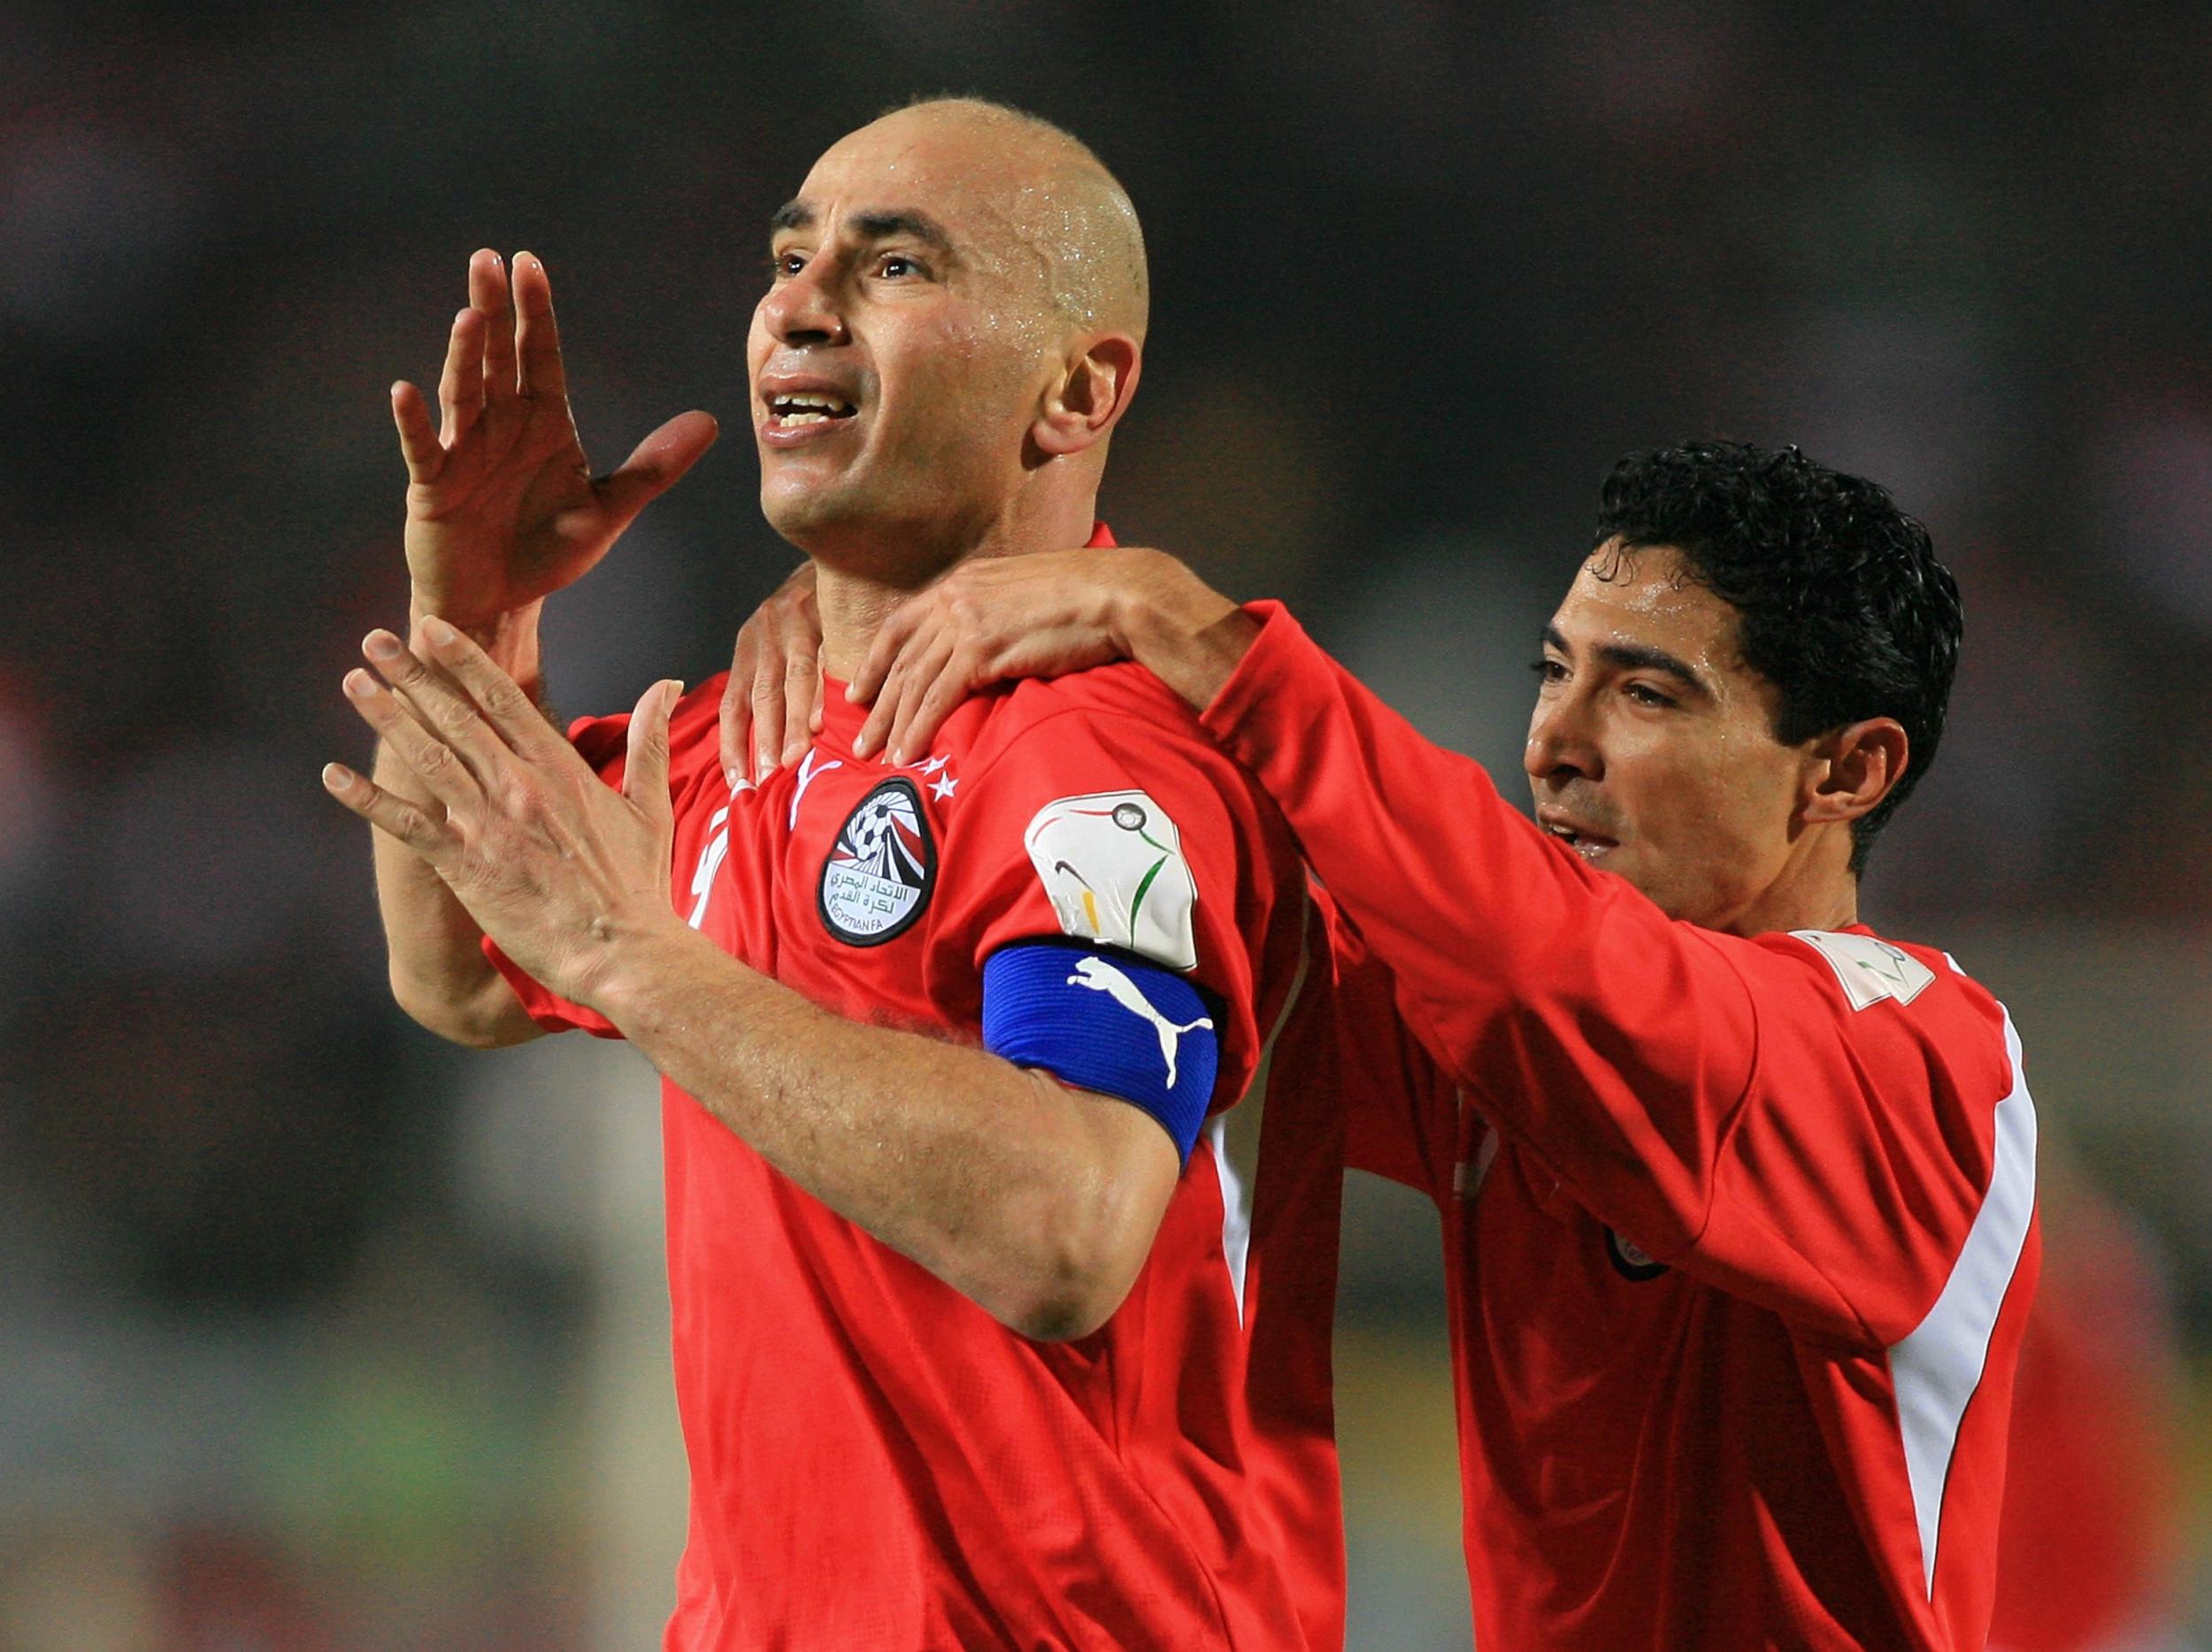 Hossam Hassan remains the country's top goalscorer